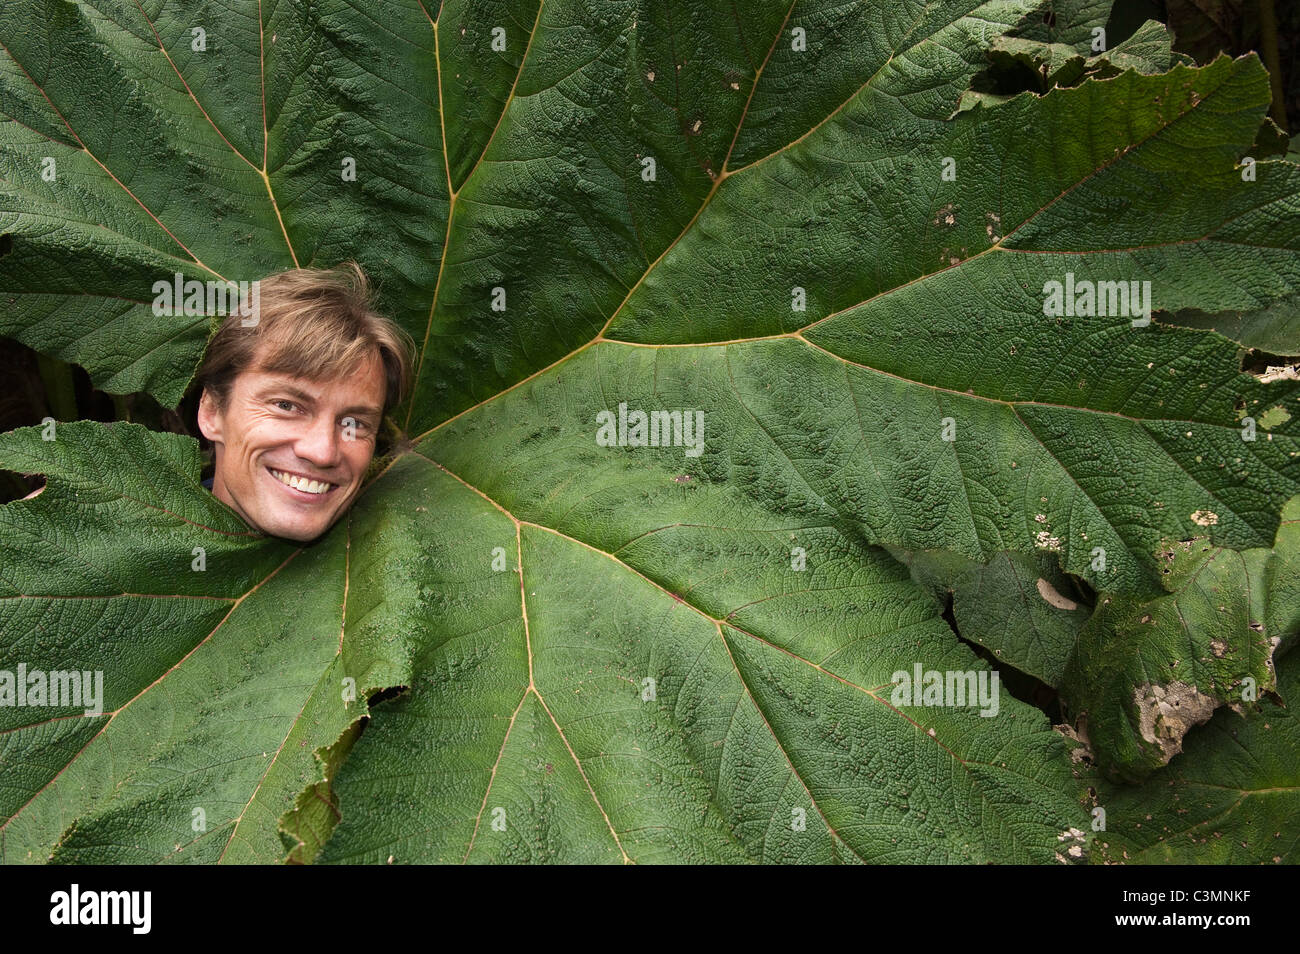 Elephants Ear (Gunnera brephogea), laughing man looking out from a giant leaf. Mindo Cloud Forest, Ecuador Stock Photo